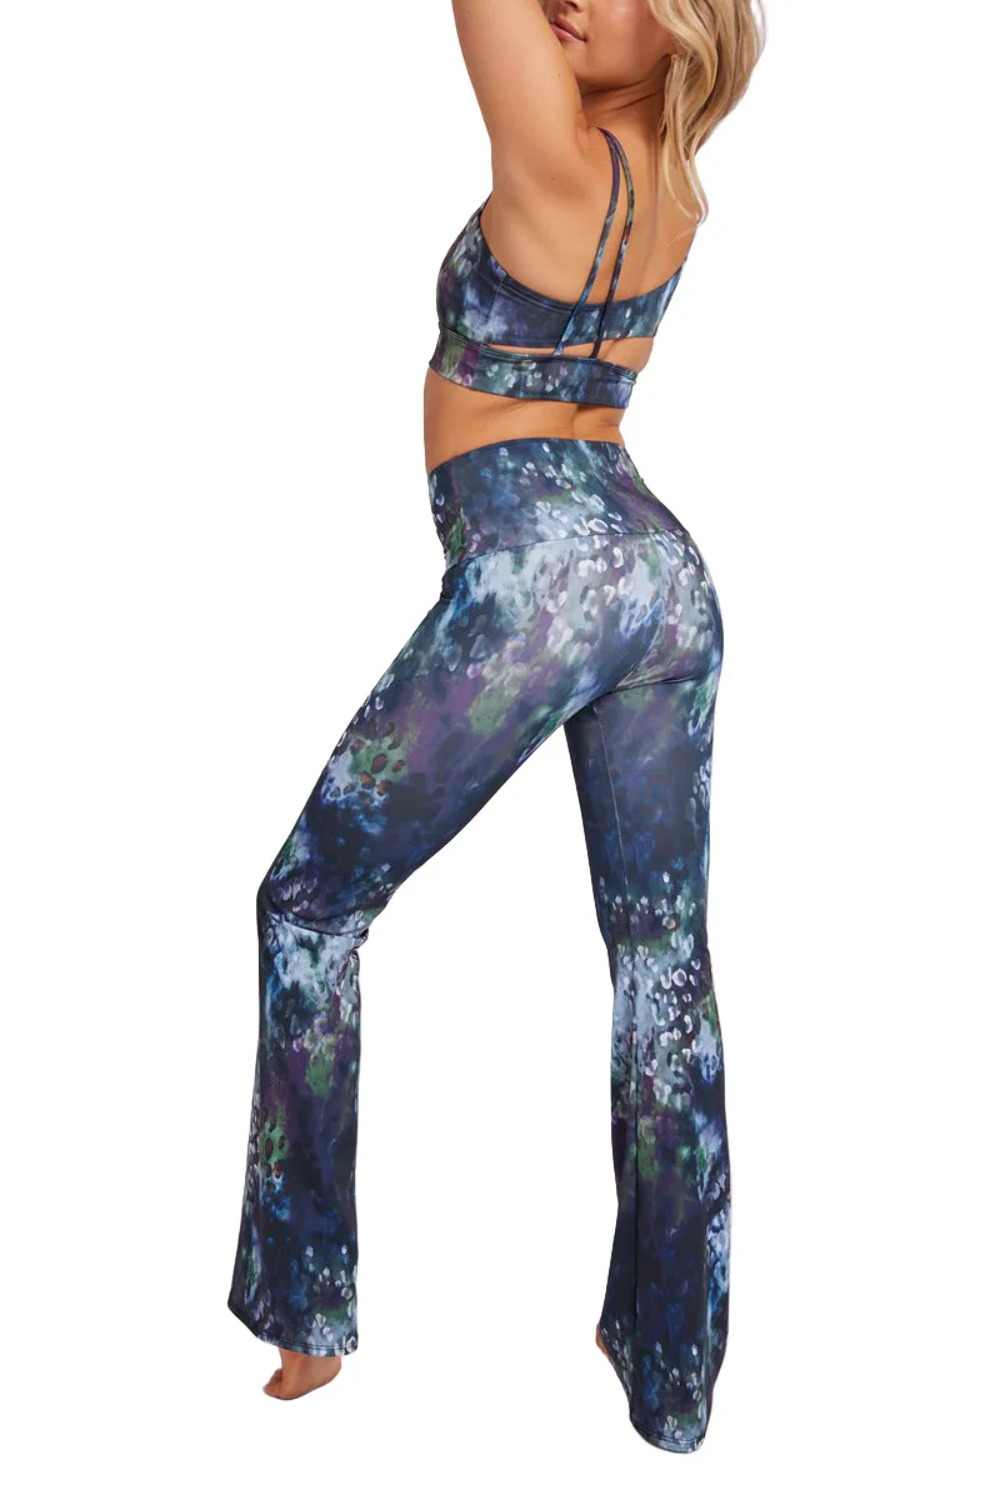 Last Chance! Onzie Hot Yoga Chic Bra 354 -2 prints available!